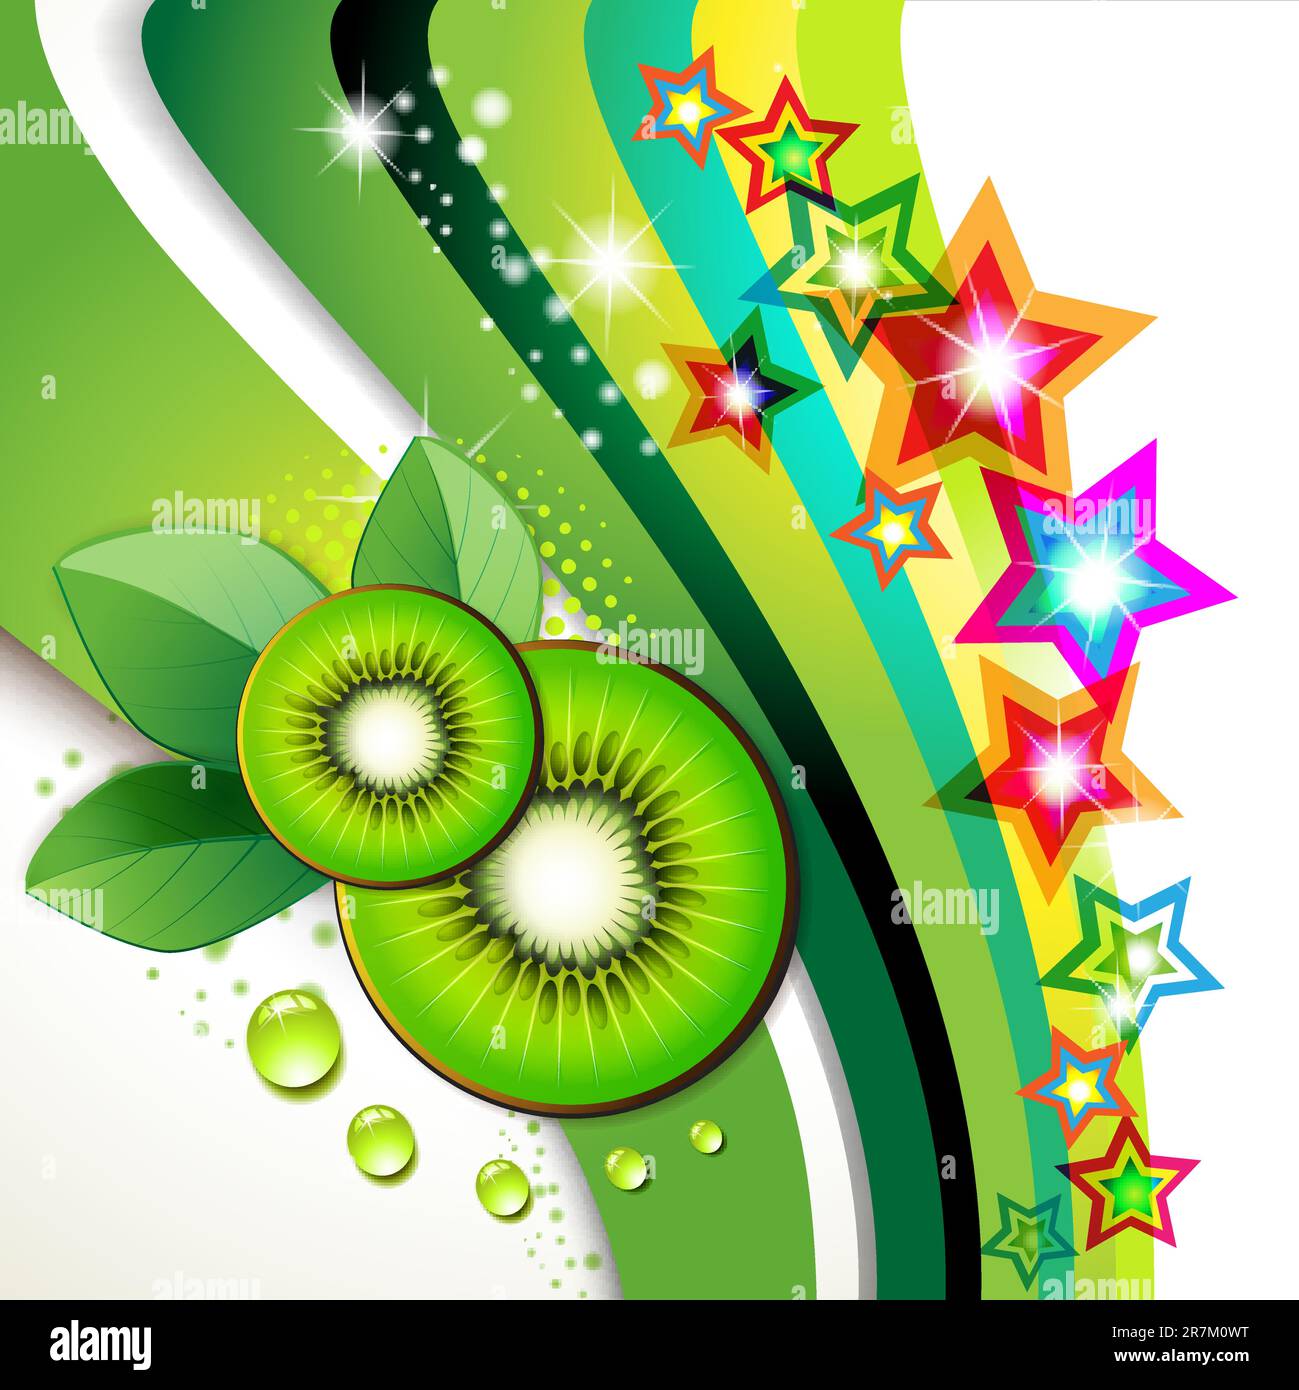 Kiwi slices with leaf over colored background Stock Vector